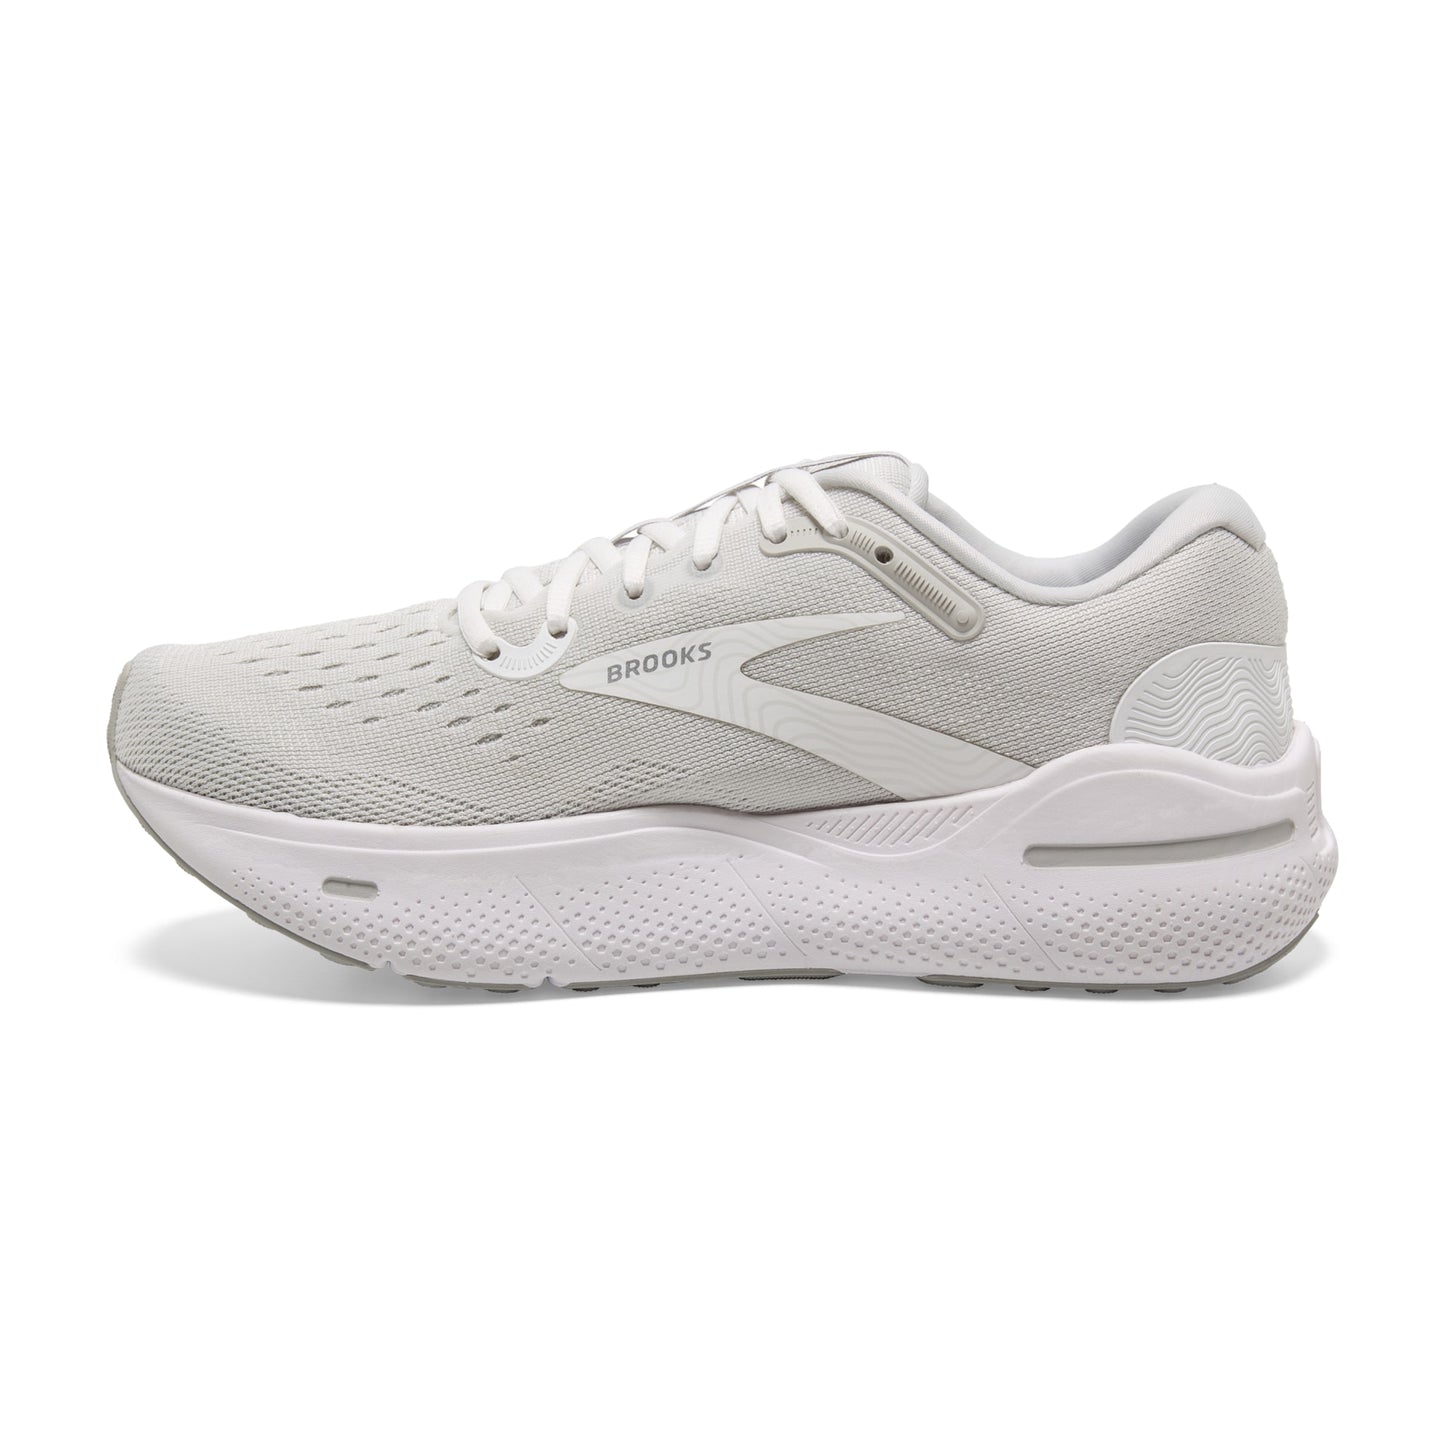 Ghost Max femmes 124 White/Oyster/Metallic Silver